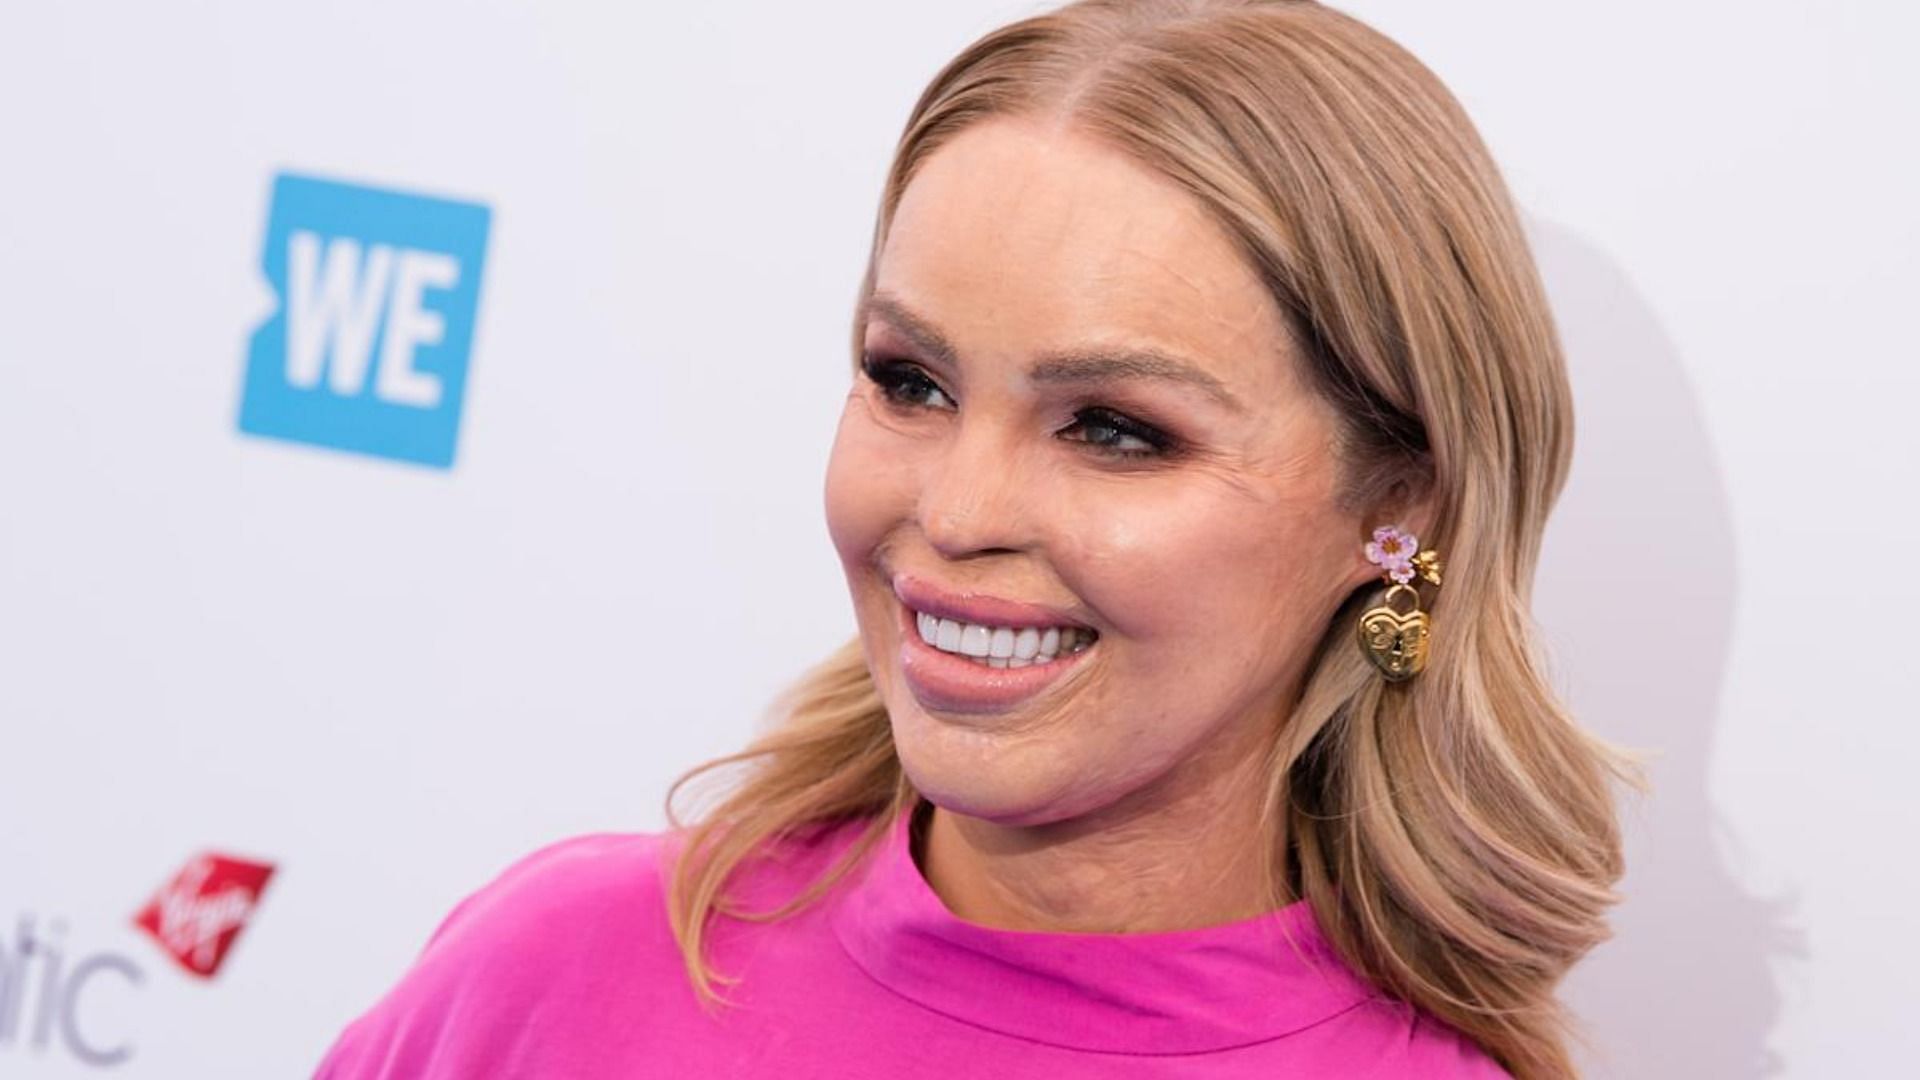 Katie Piper was attacked by her ex-boyfriend and his plus one in 2008 (Image via Getty Images/ Jeff Spicer)